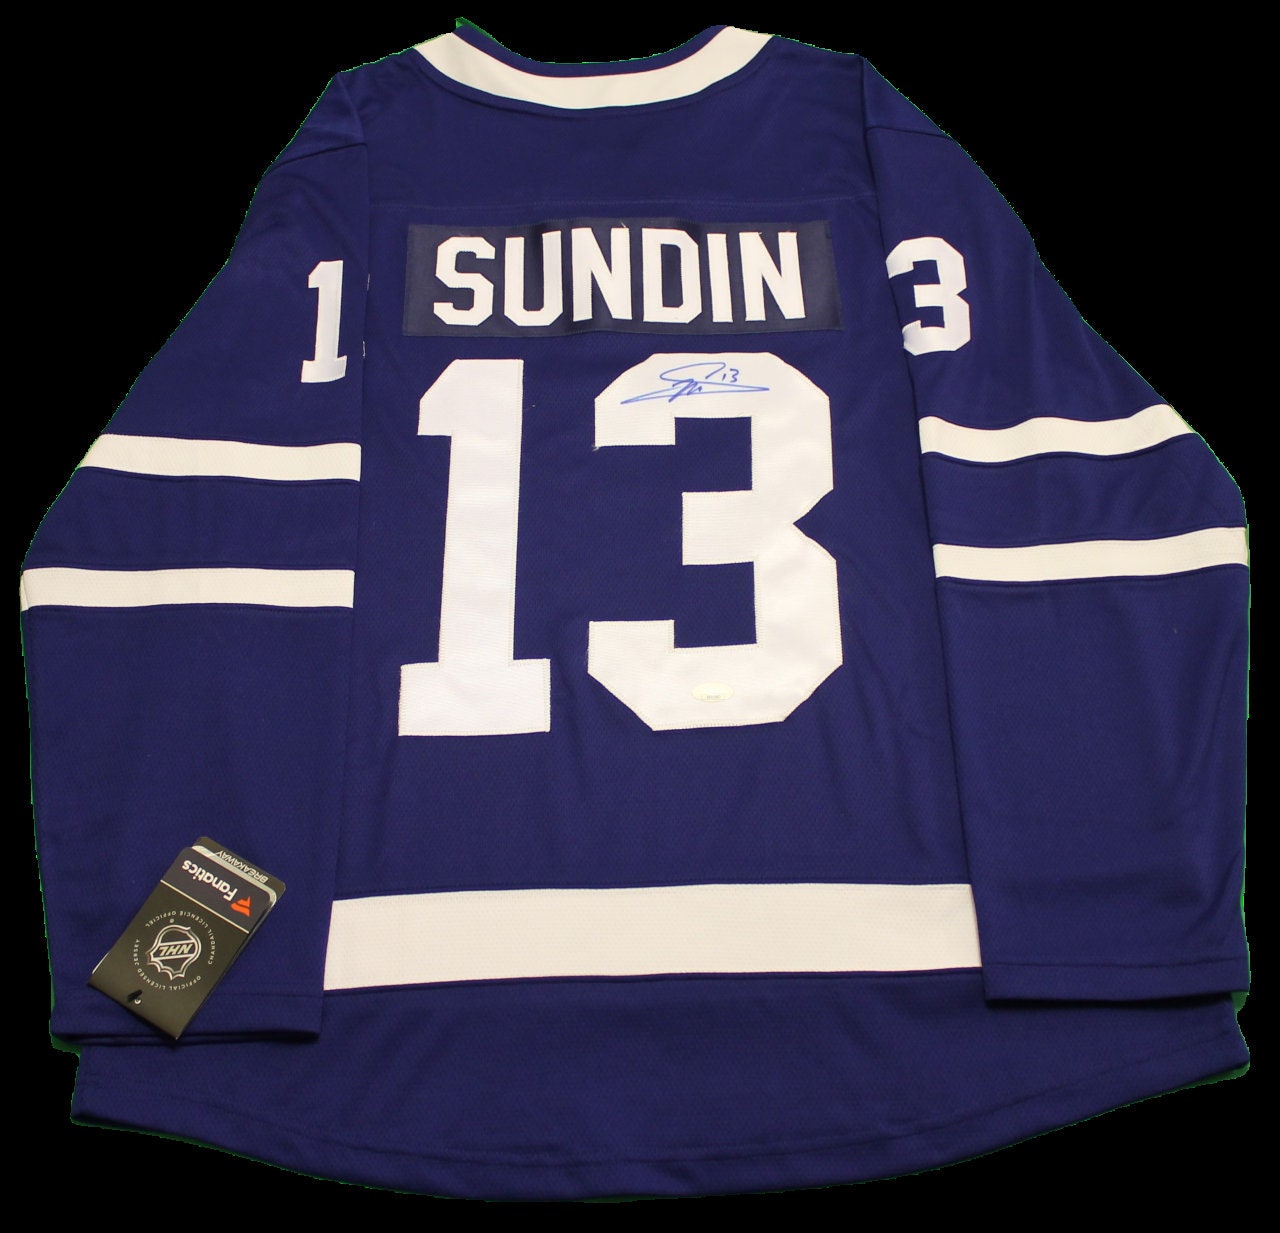 Mats Sundin Signed Memorabilia and Collectibles